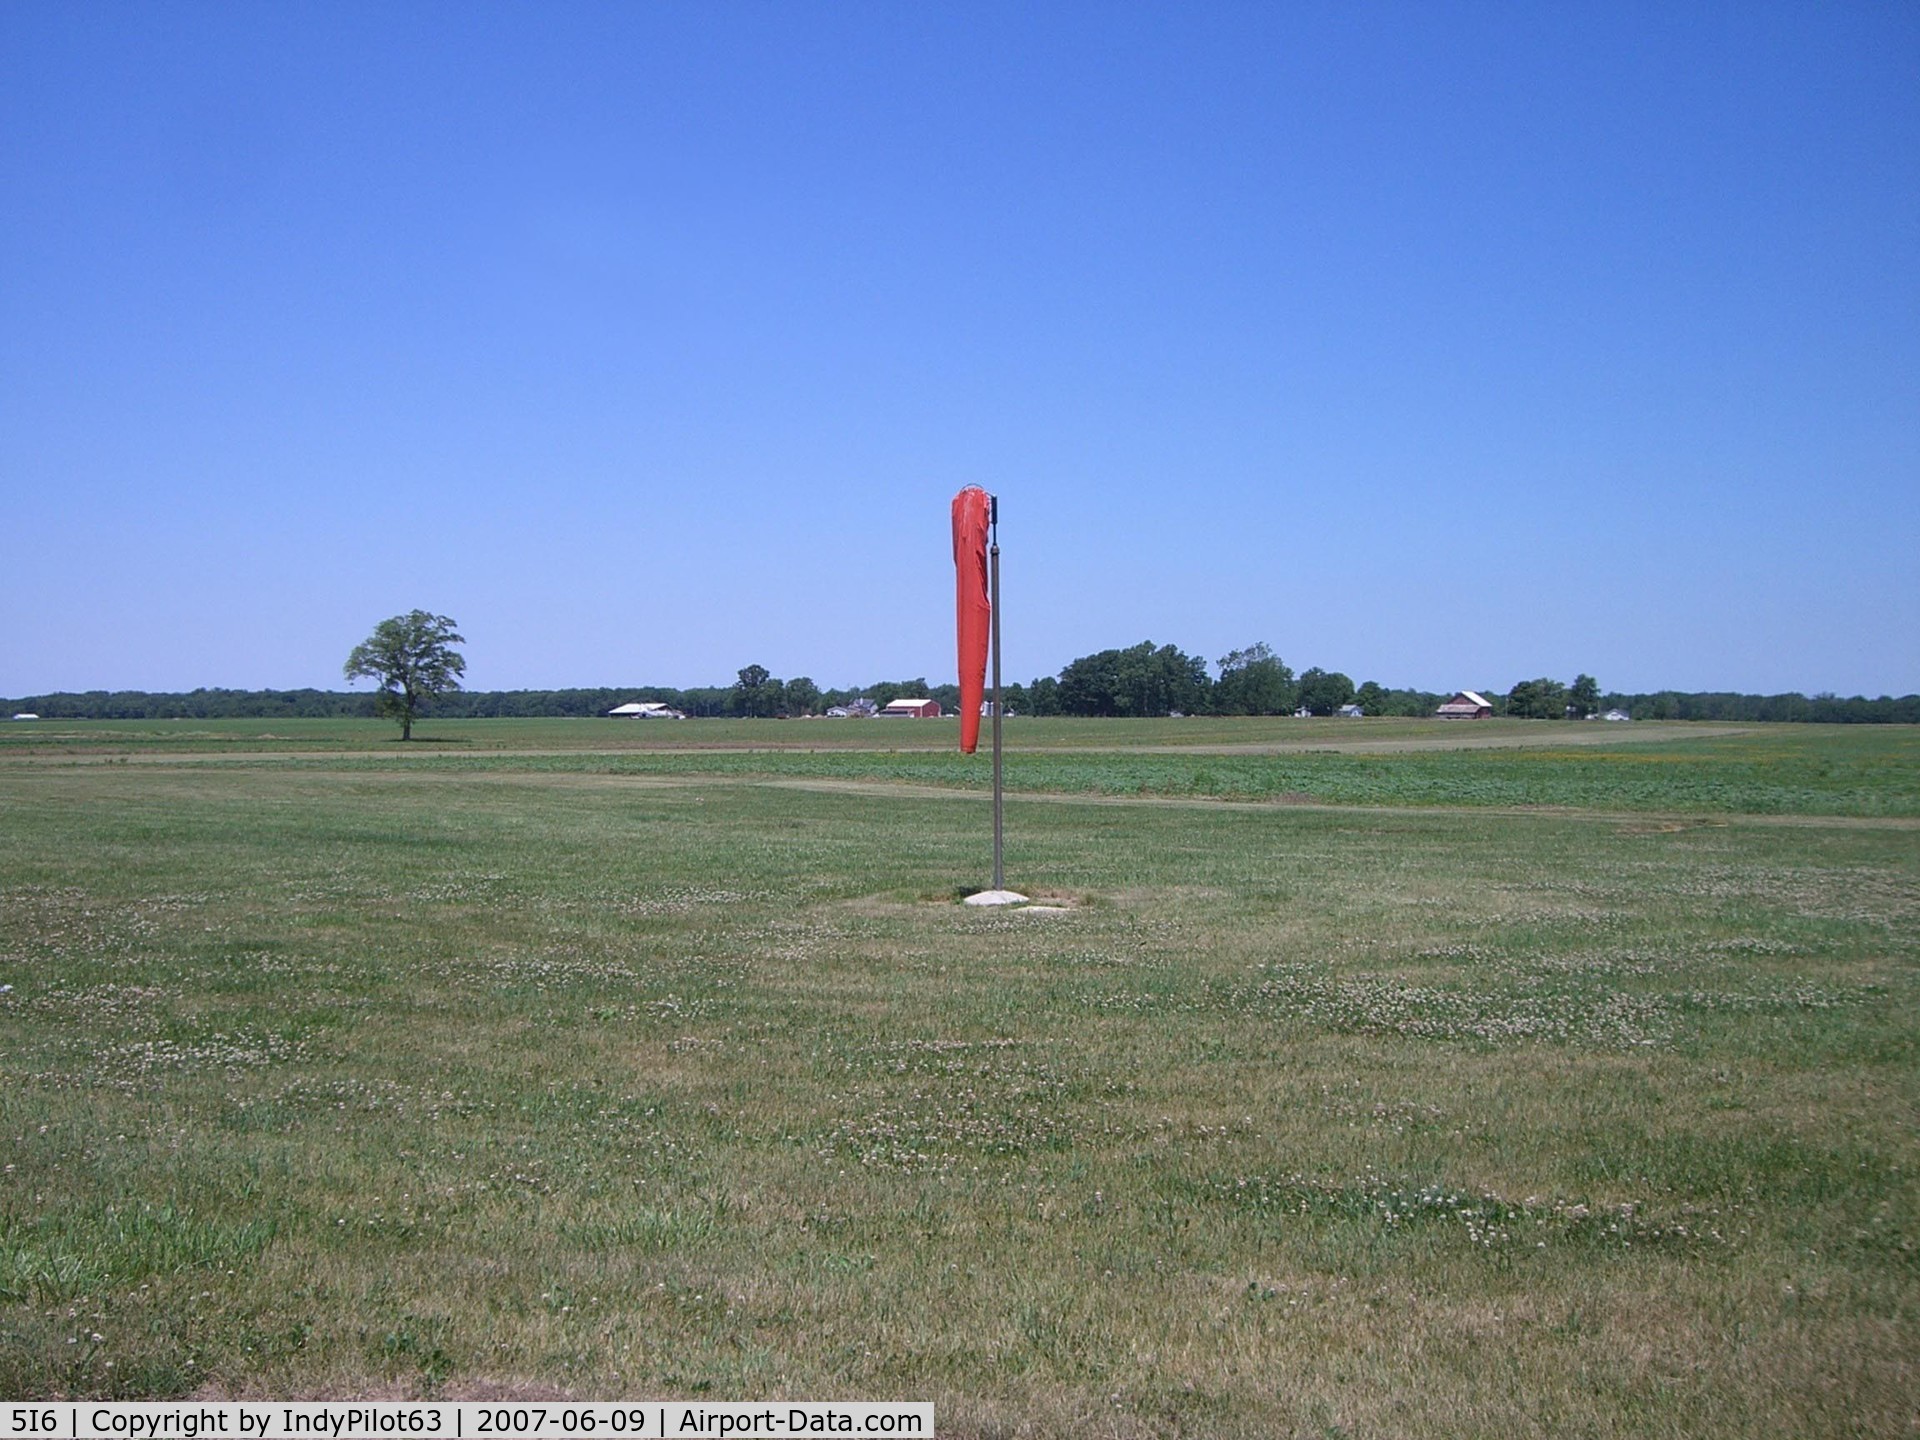 Galveston Airport (5I6) - Windsock next to the strip.